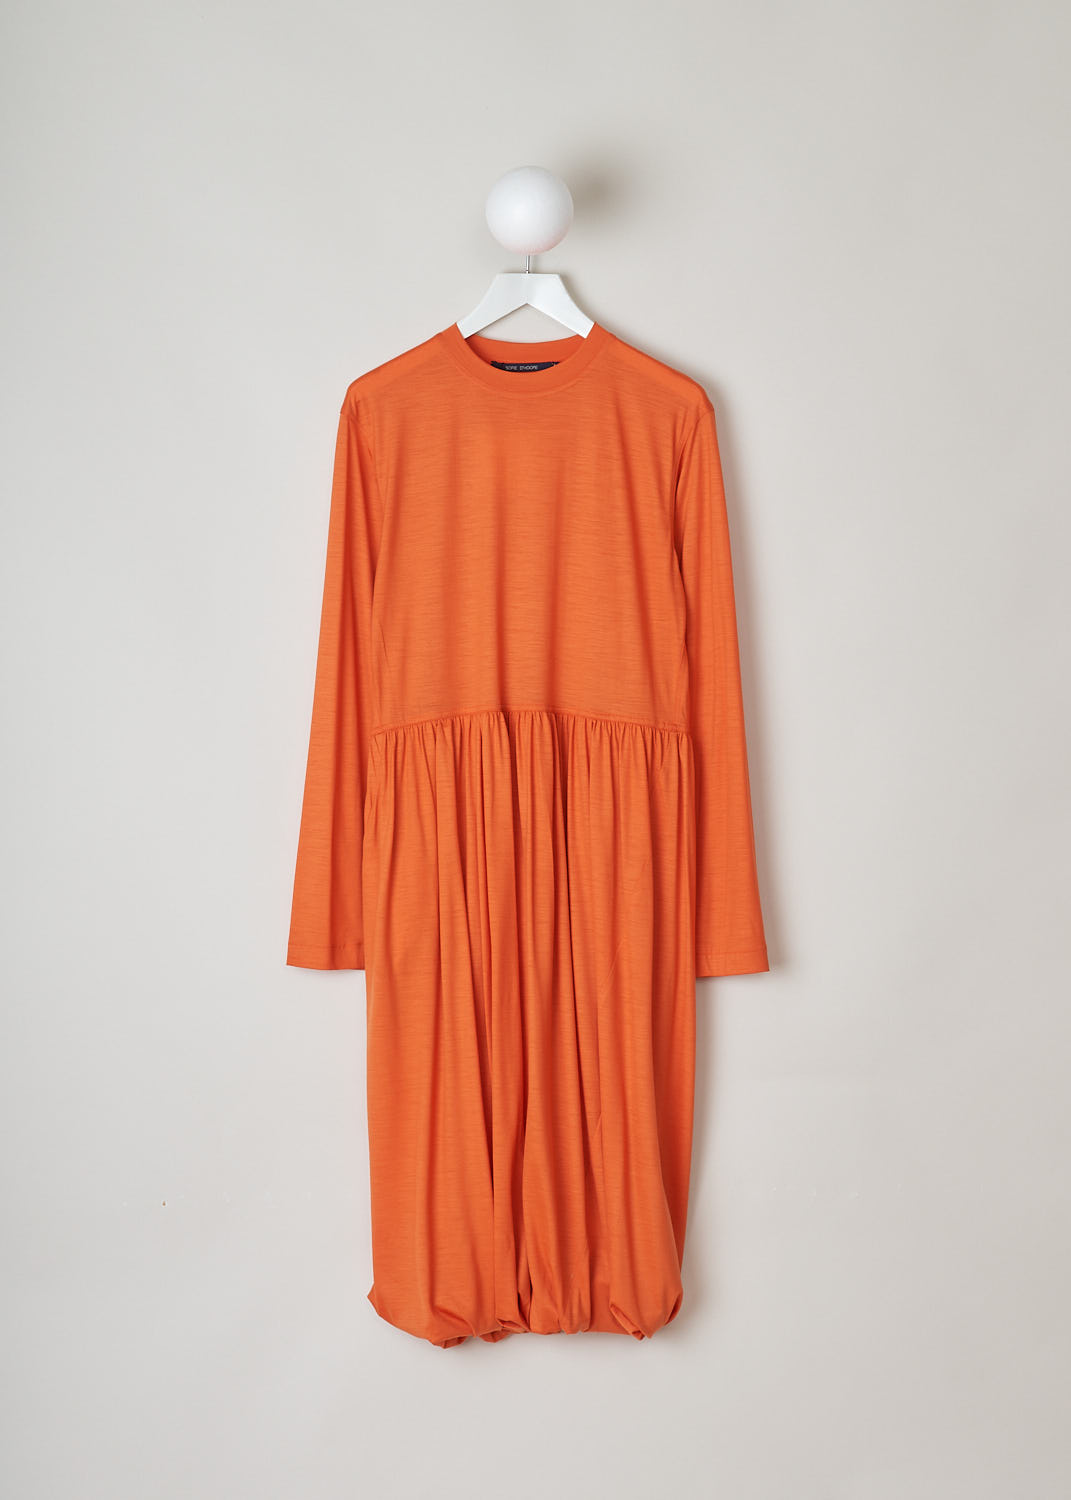 SOFIE Dâ€™HOORE, ORANGE LONG SLEEVE DRESS, DEMURE_WOJE_PAPAYA, Orange, Front, This orange mid-length dress features a round neckline, a plain long sleeve bodice and a twisted balloon skirt. A single side pocket can be found concealed in the seam. 
